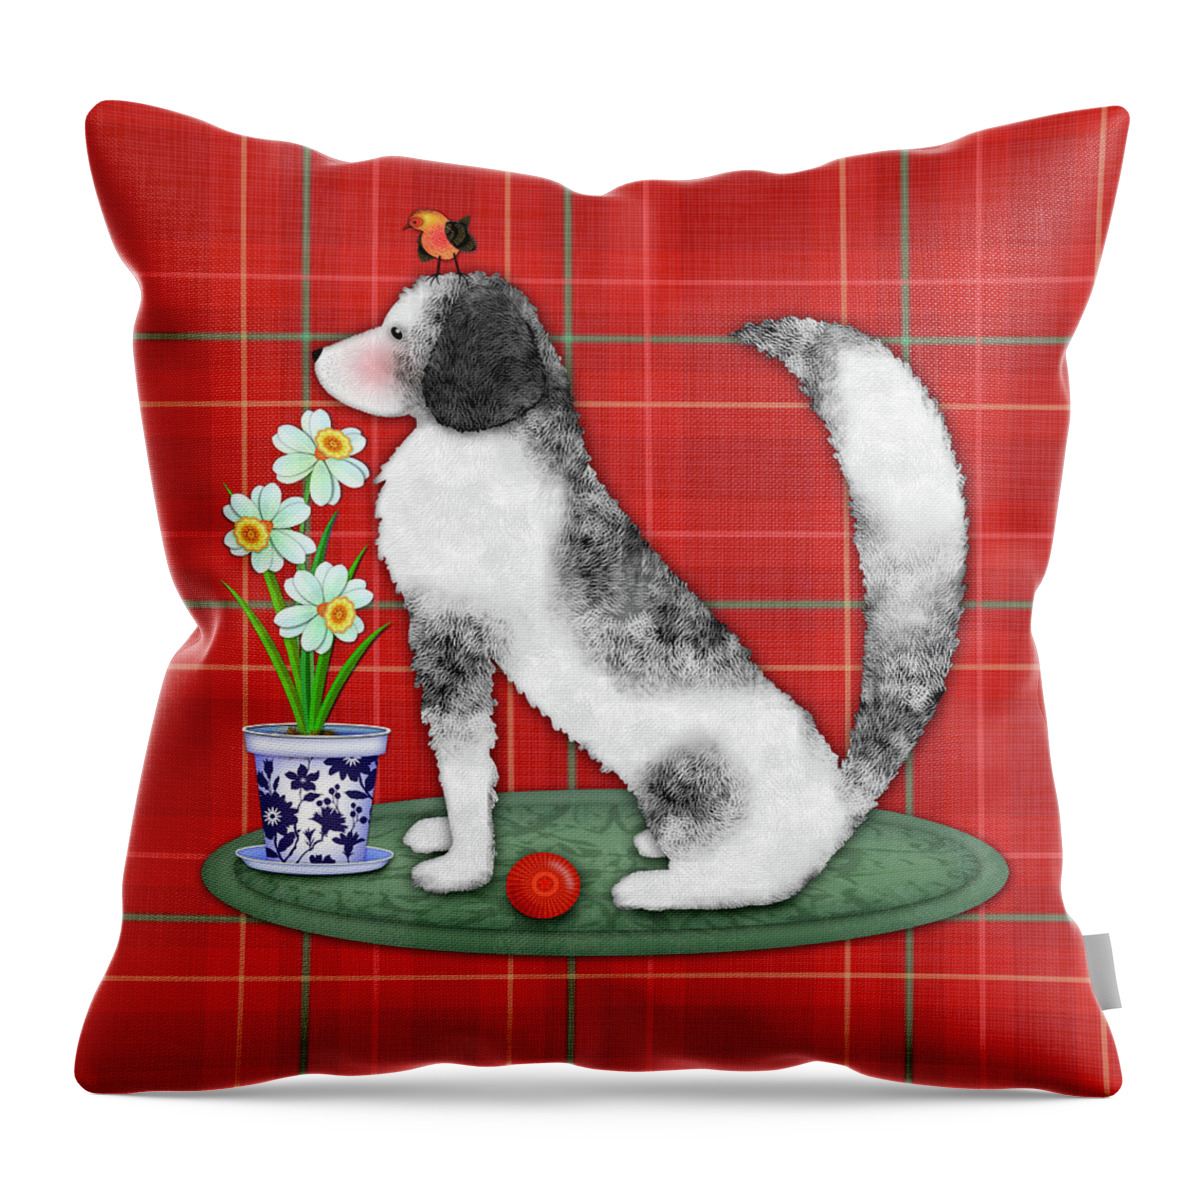 Letter N Throw Pillow featuring the digital art N is for Newfoundland Dog by Valerie Drake Lesiak